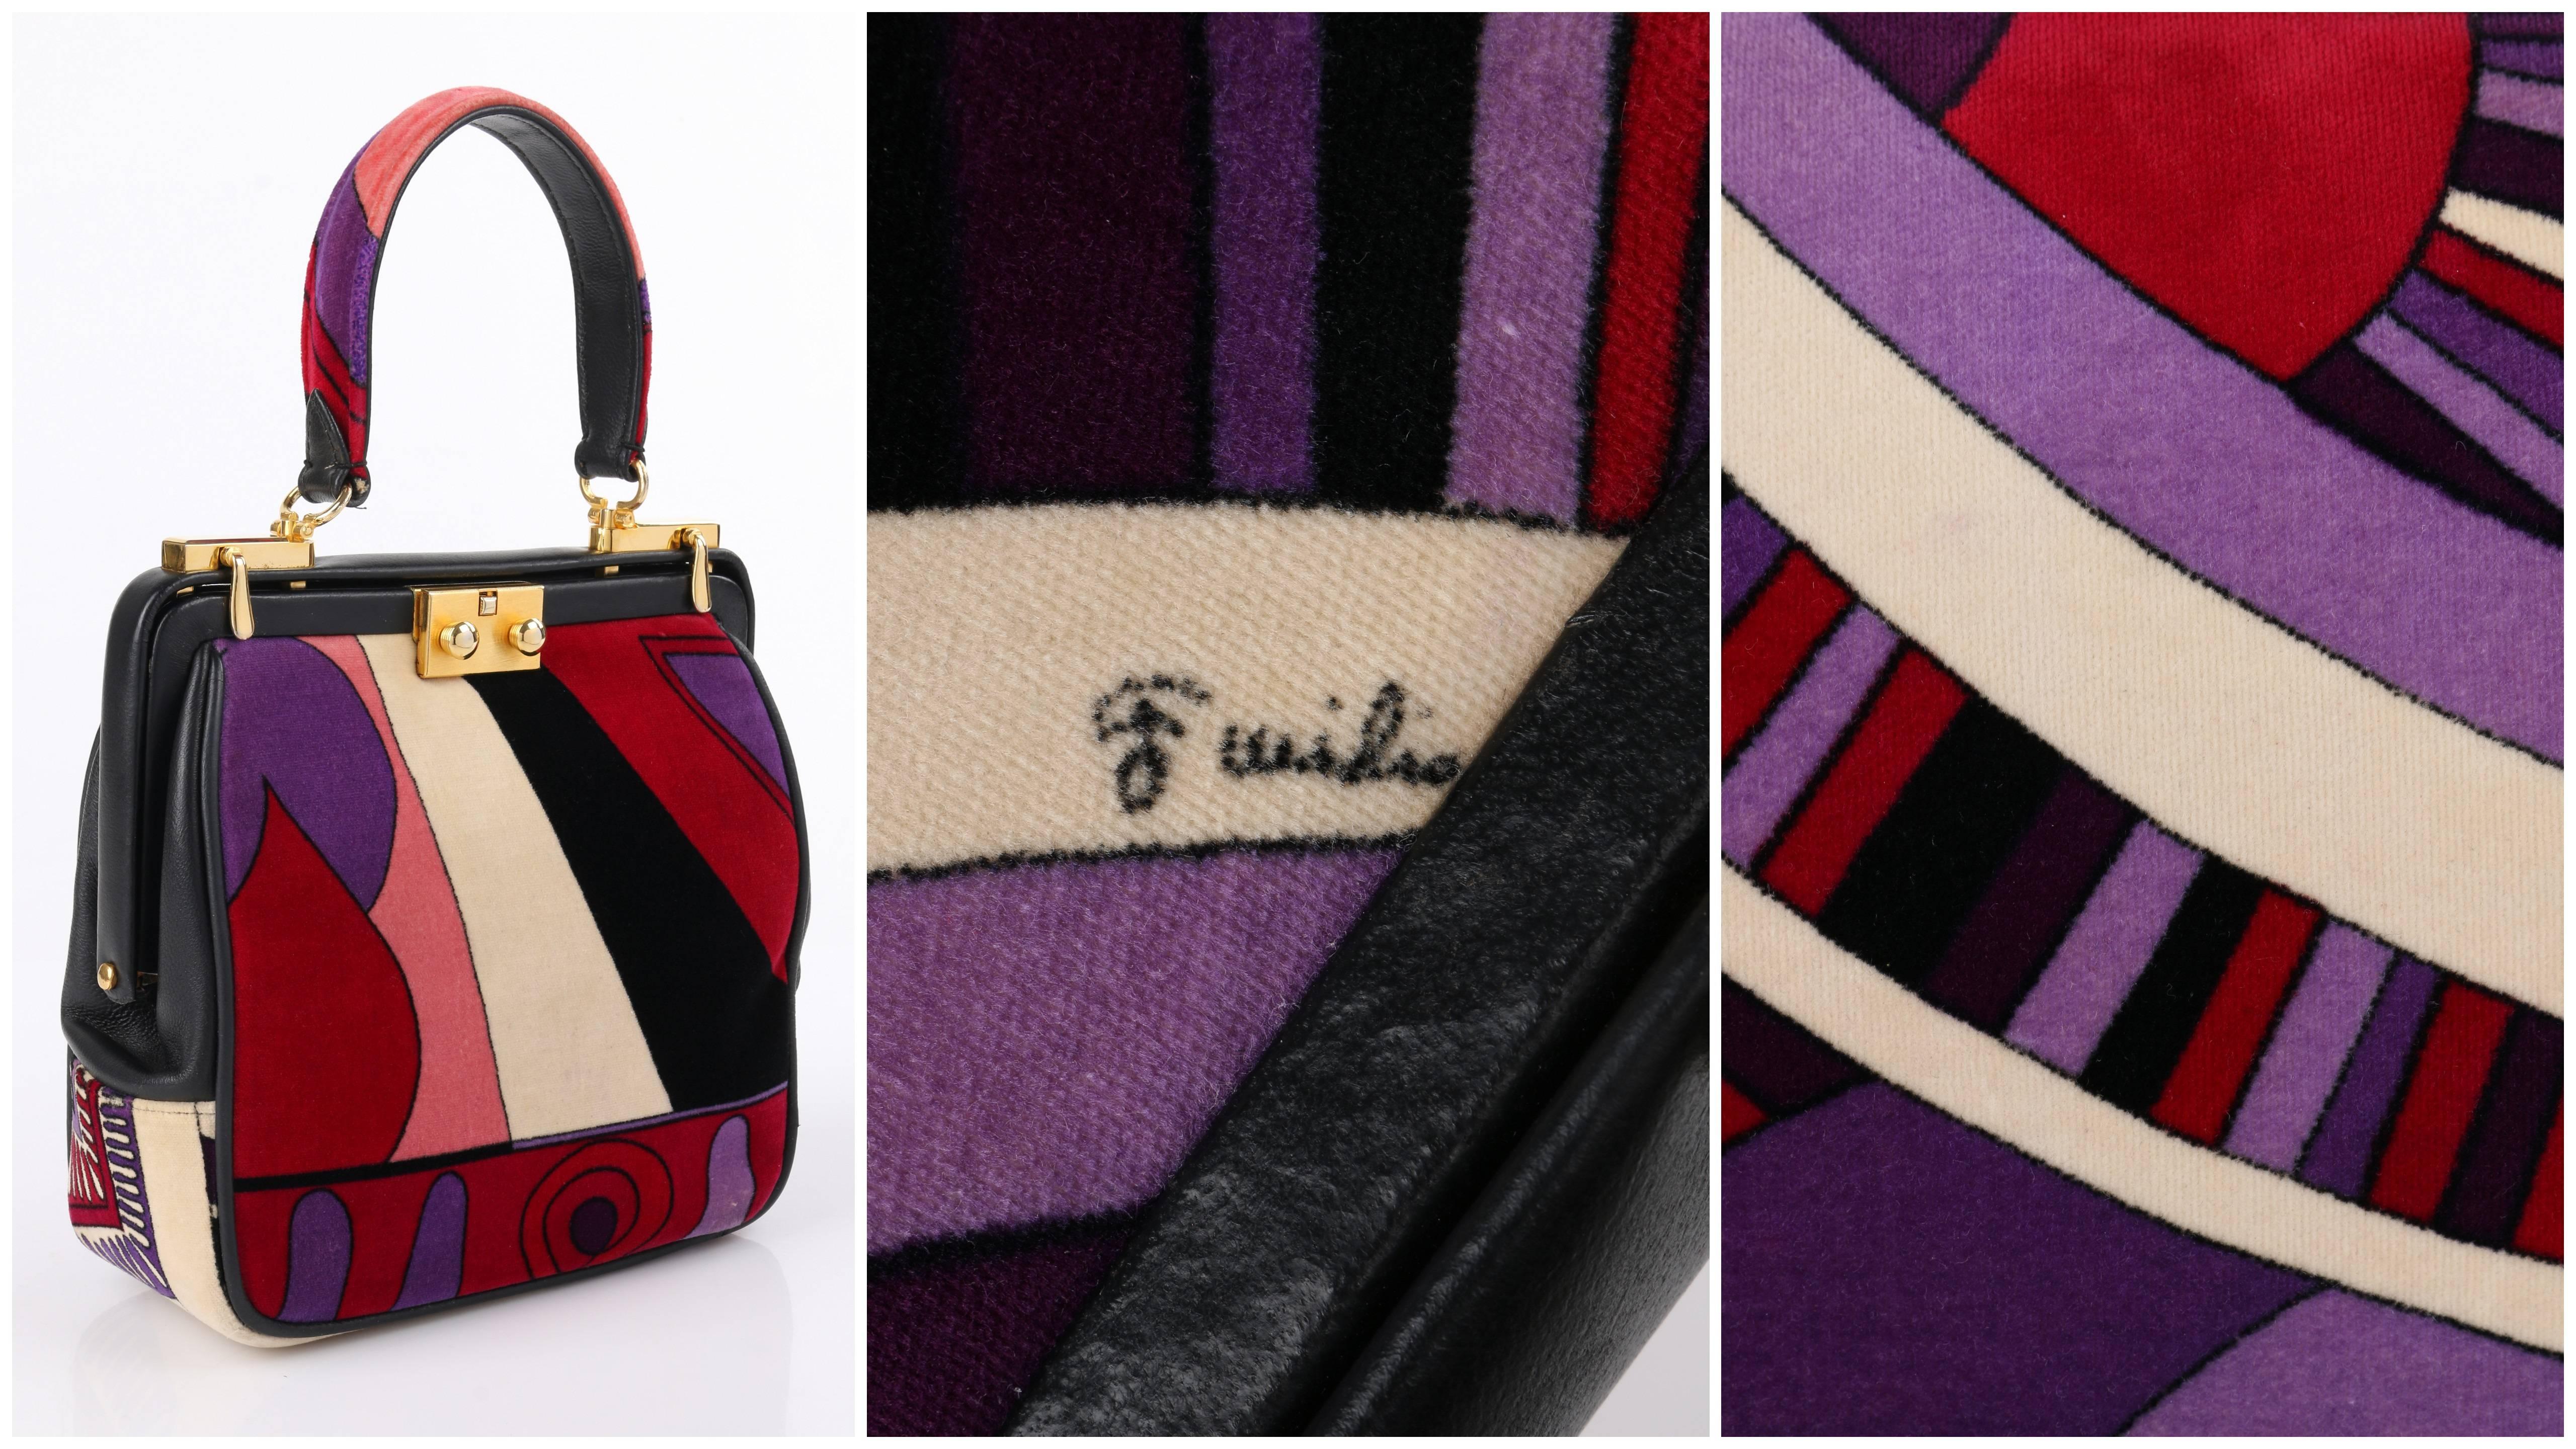 Vintage Emilio Pucci c.1964 "Taitù" signature print cotton velvet and black leather purse. Multicolor op art velvet print in shades of purple, wine red, light pink, black, and ivory with black leather piping. Single top handle with velvet